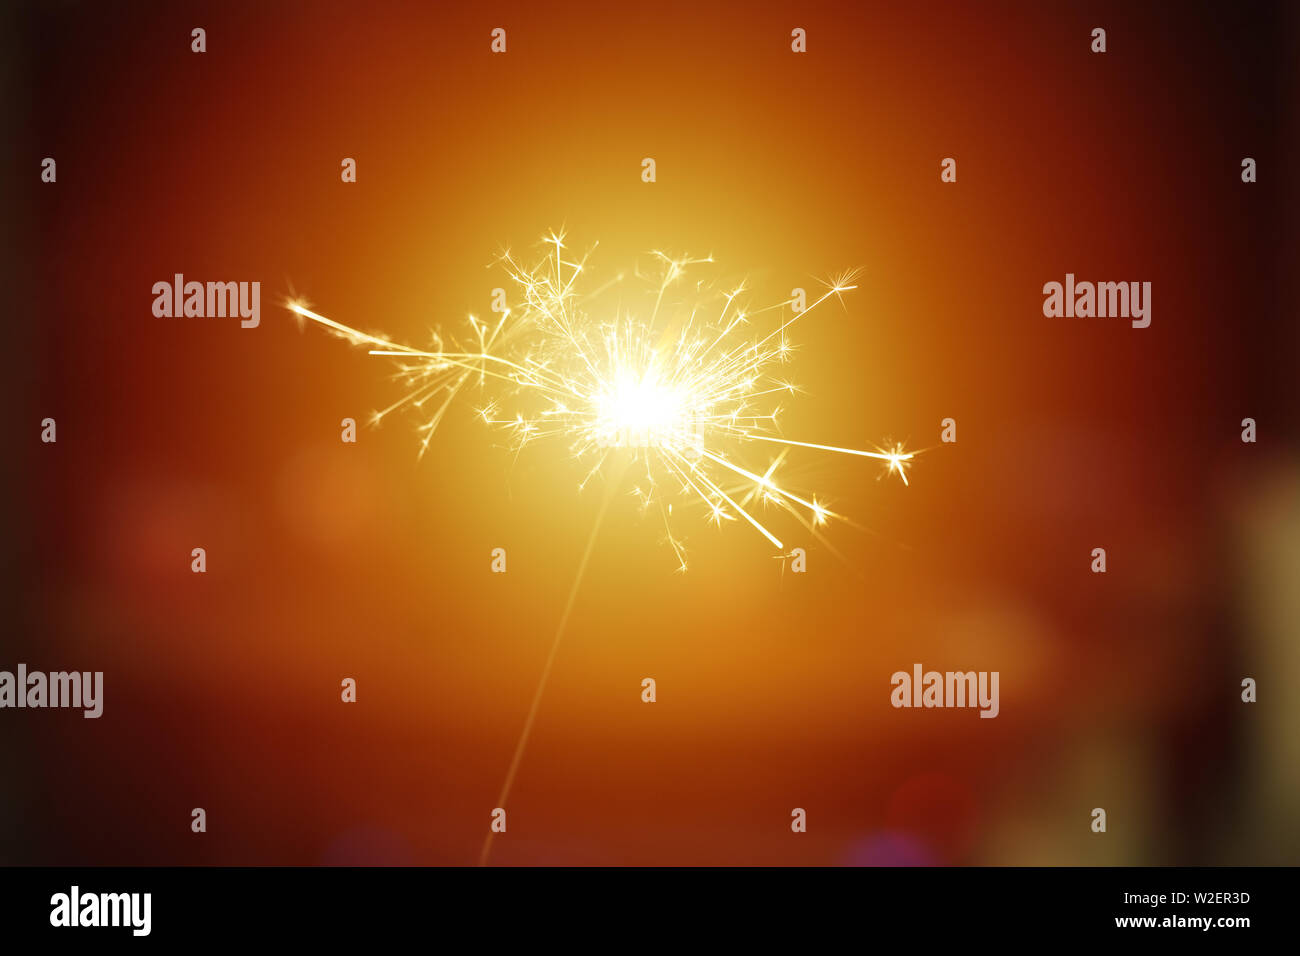 Sparks from hand cold fireworks bright sun orange brown background Stock Photo